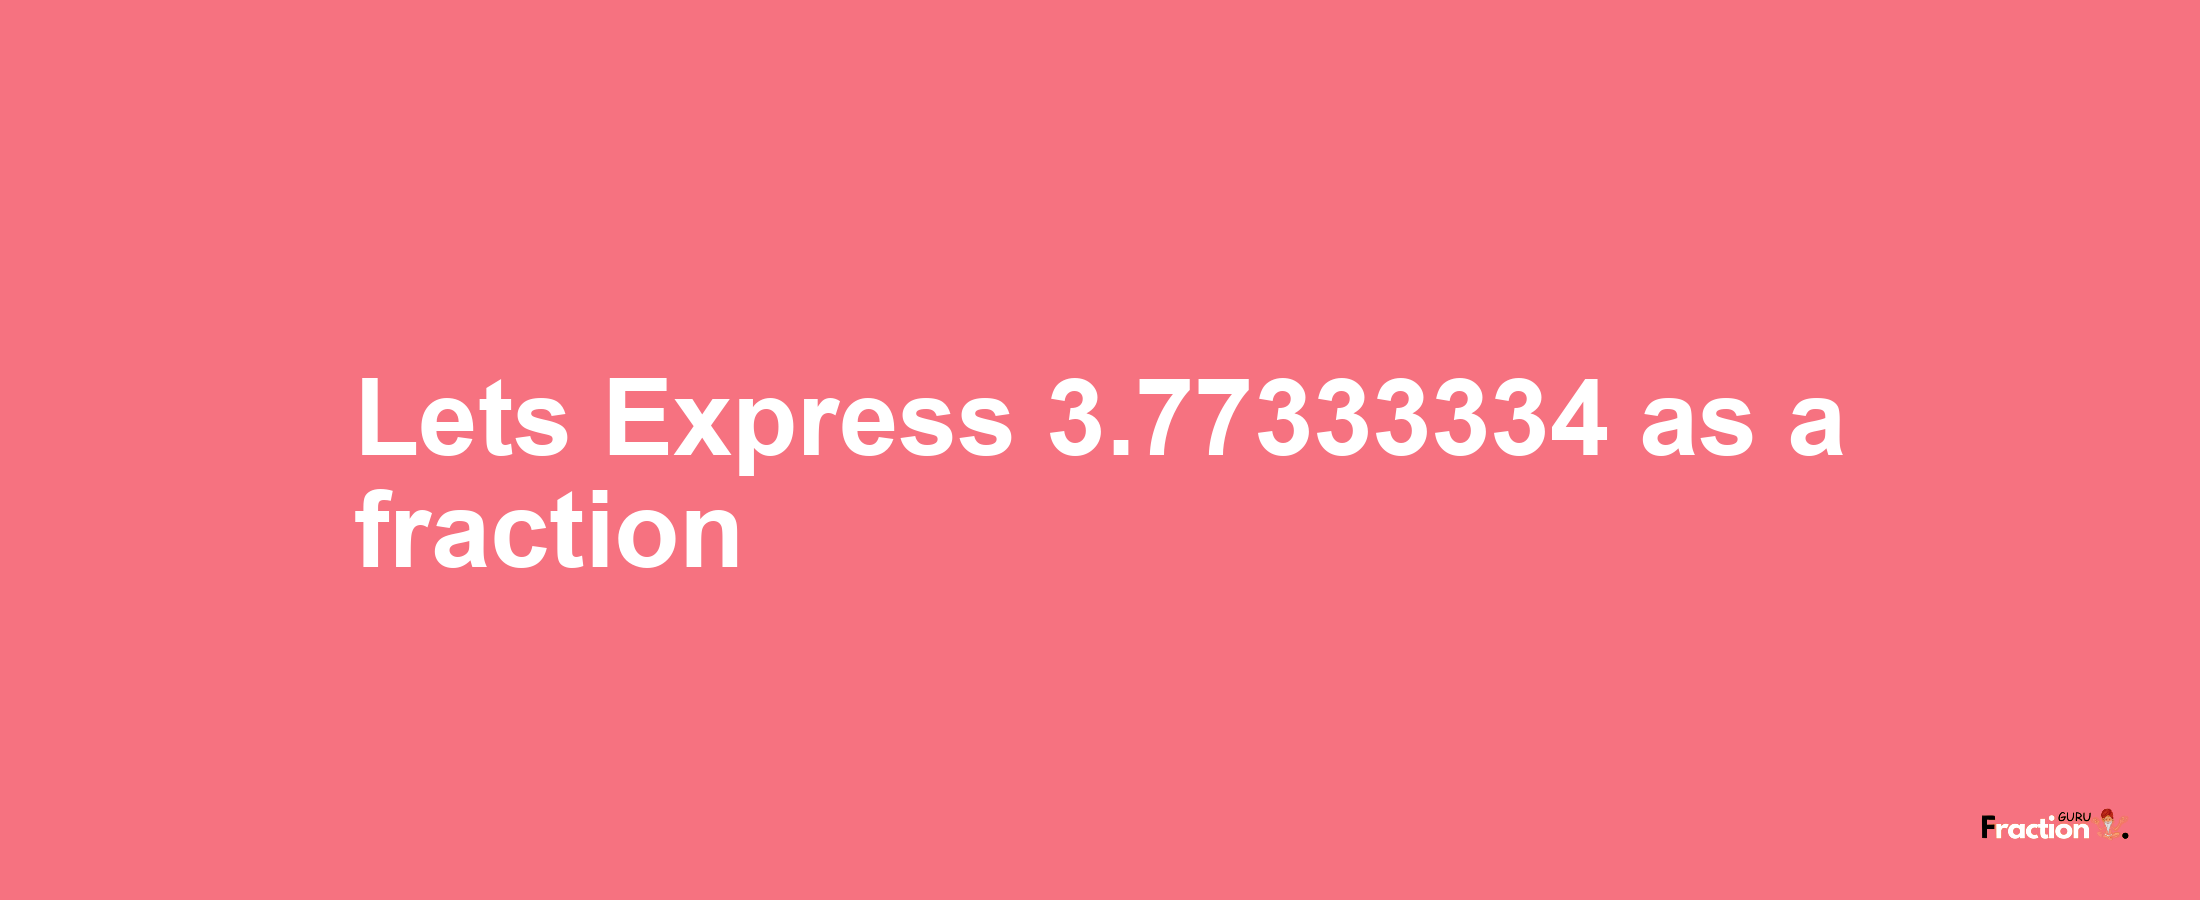 Lets Express 3.77333334 as afraction